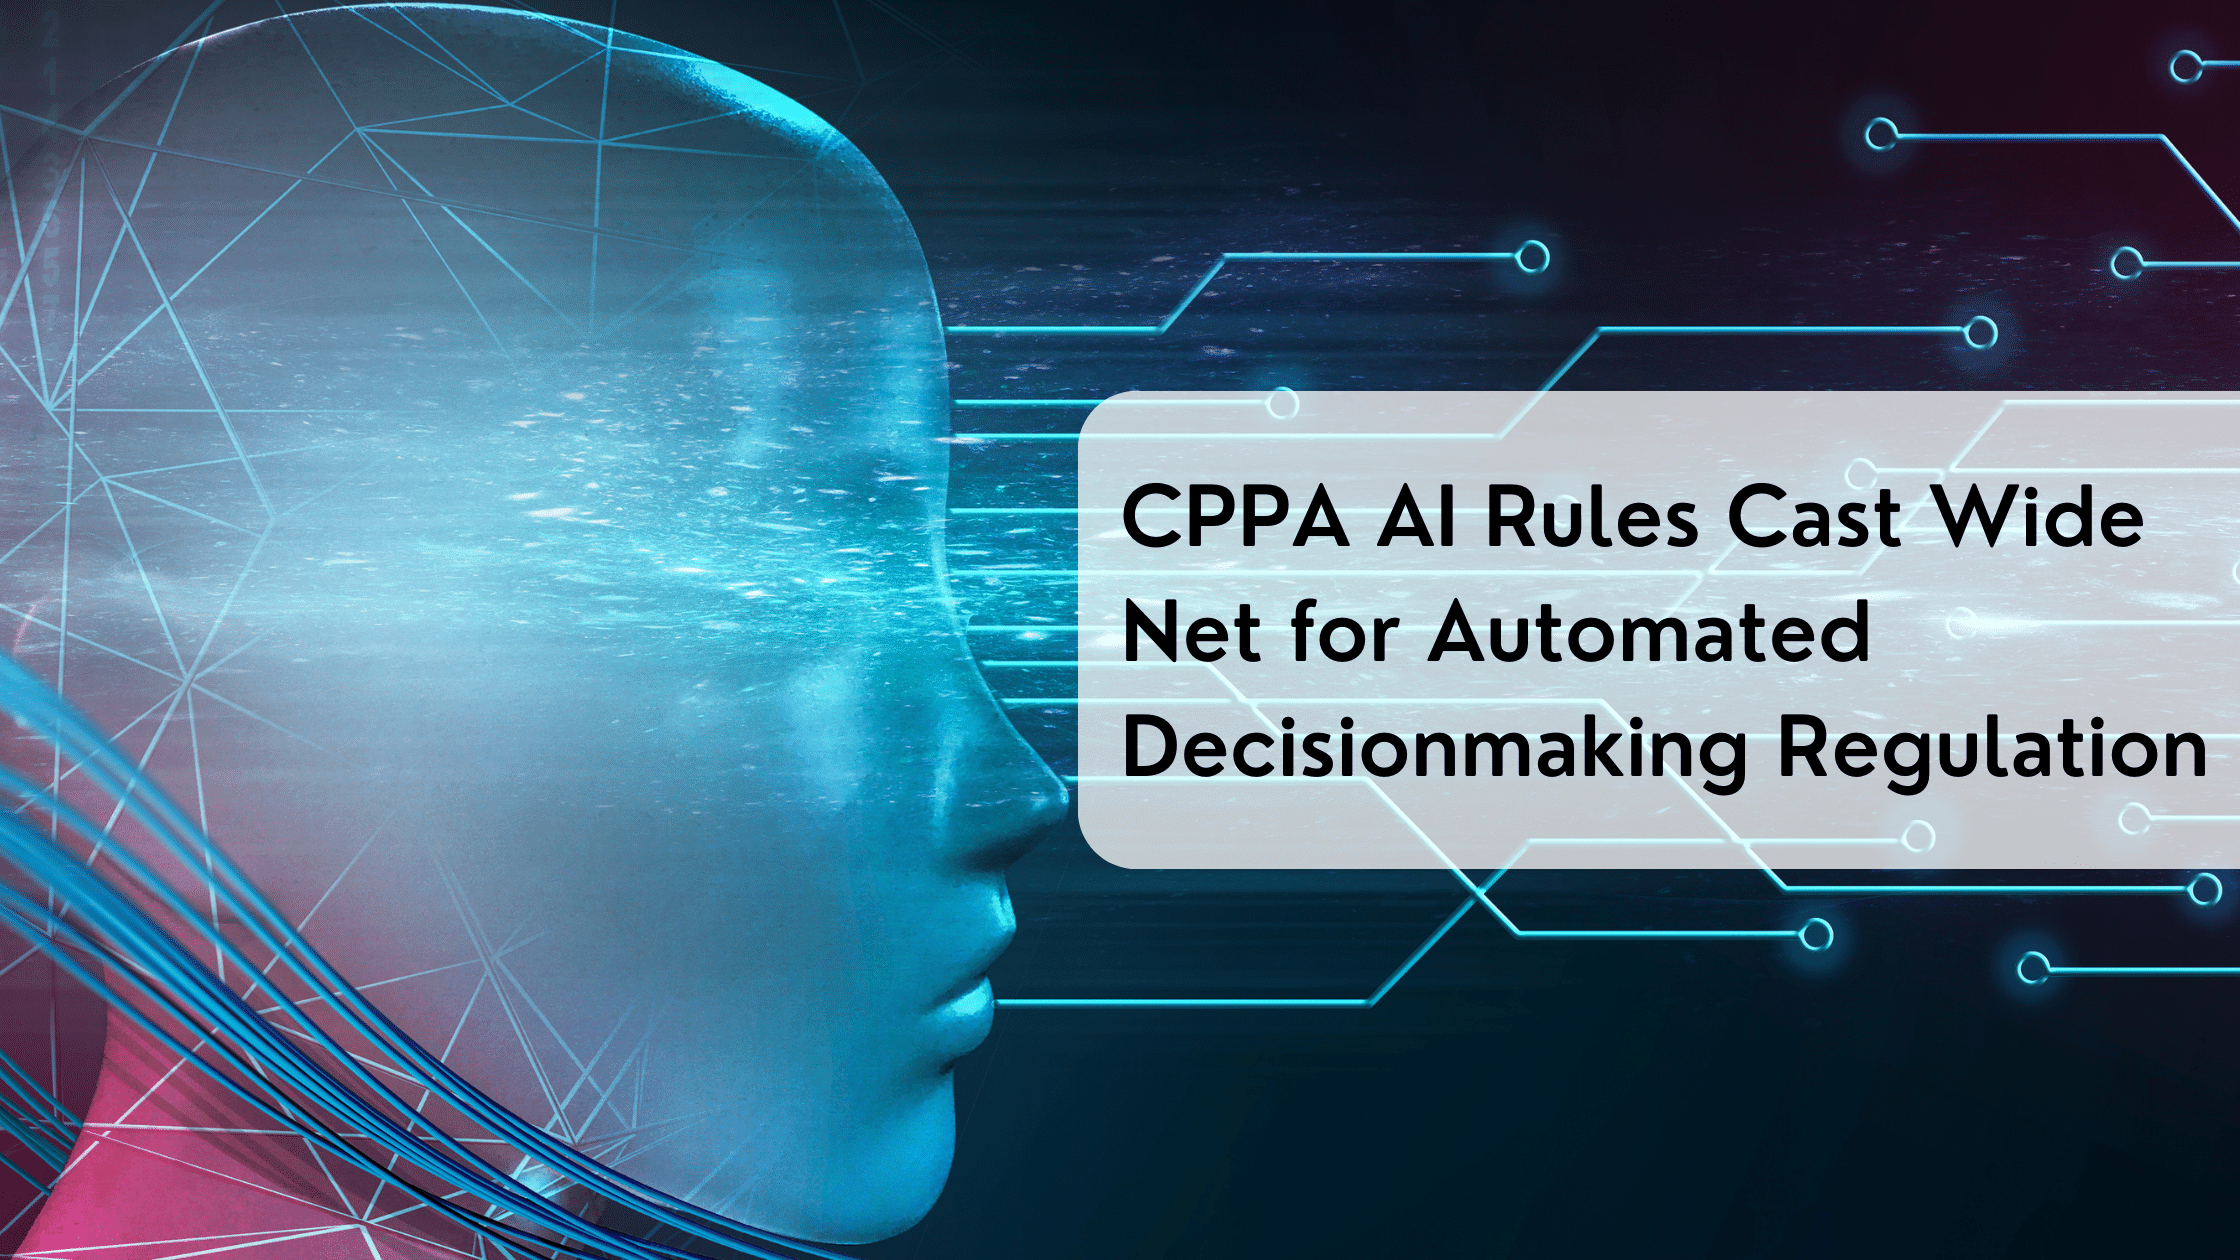 CPPA AI Rules Cast Wide Net for Automated Decisionmaking Regulation